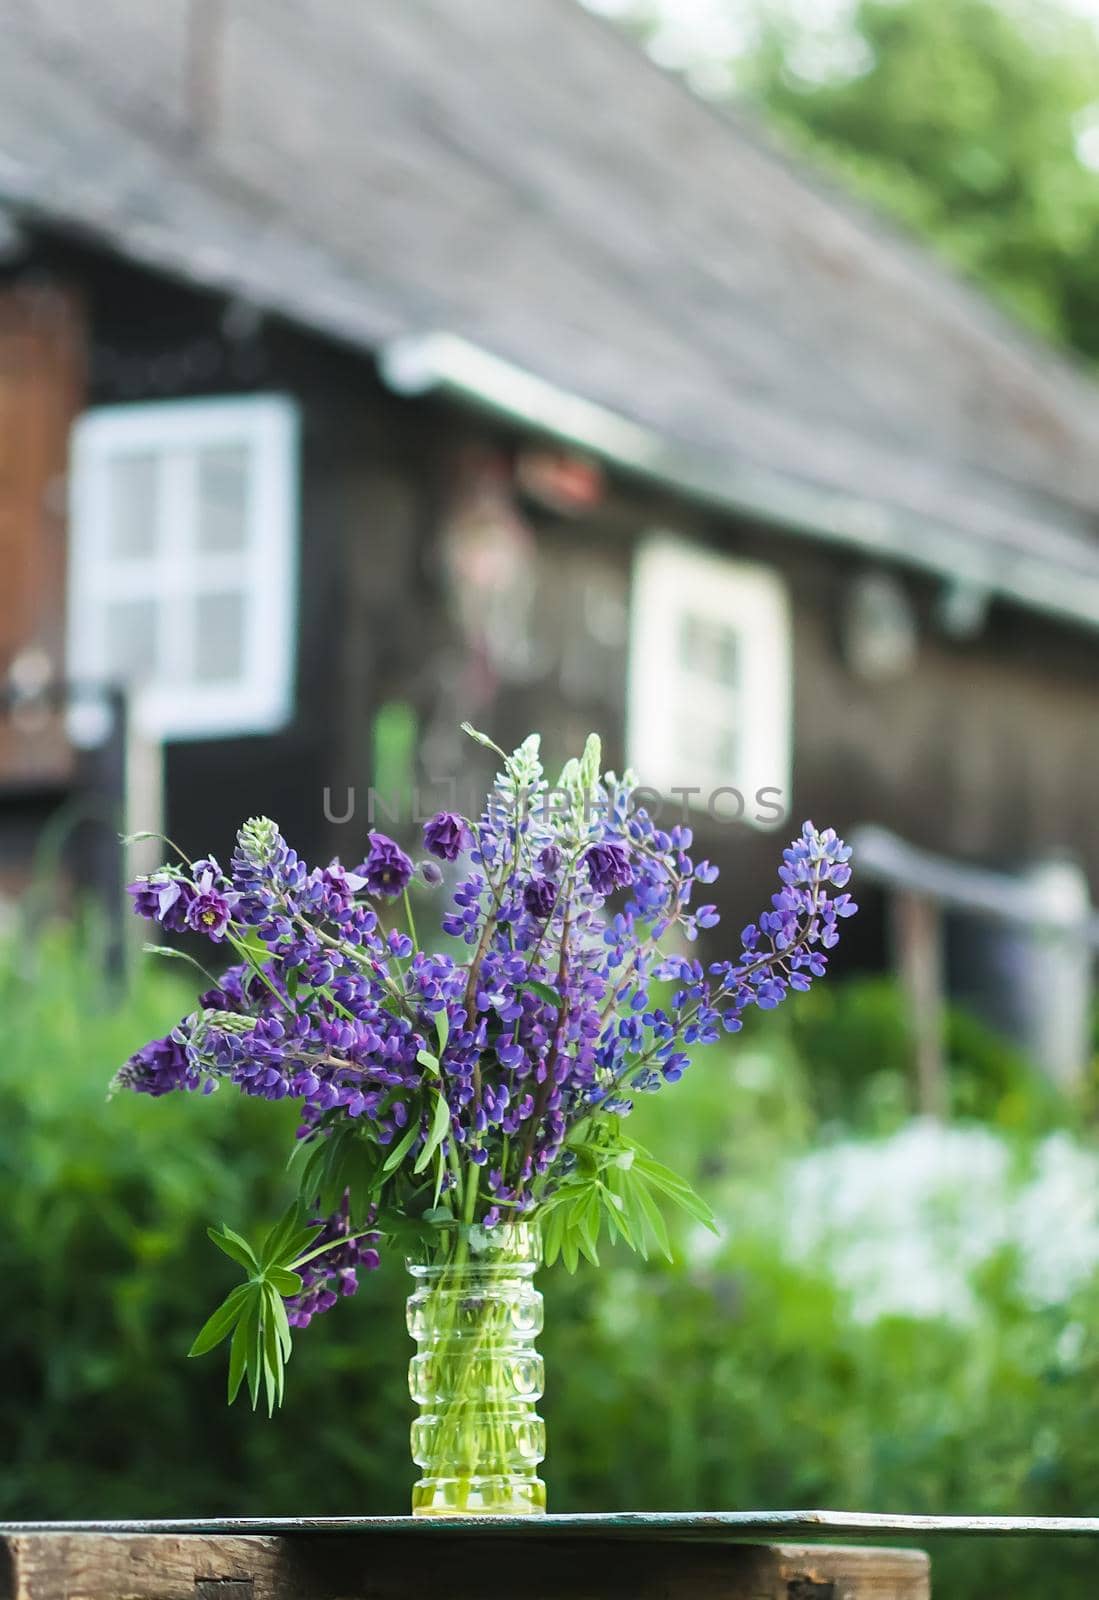 Bouquet of summer flowers on rural house building outdoors. Large-leaved or Bigleaf Lupine flowers. Lupinus polyphyllus plants. by nightlyviolet